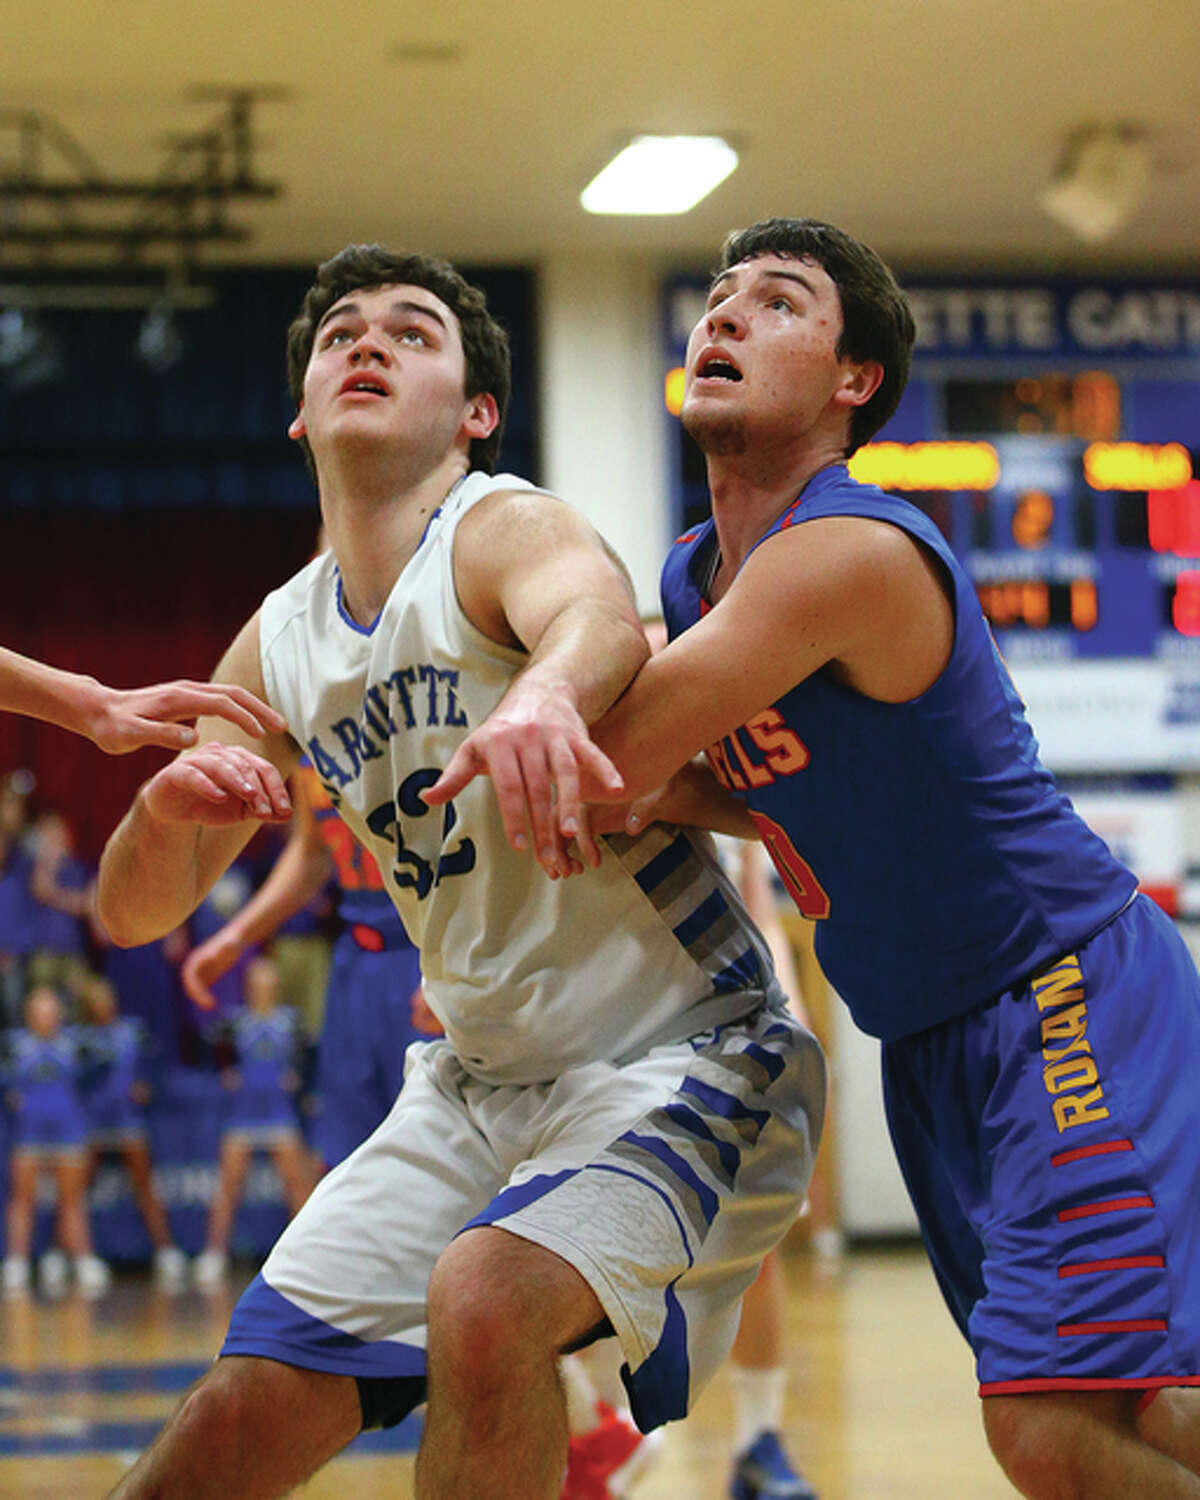 Marquette Catholic’s Ben Sebacher (left) and Roxana’s Trace Gentry battle for position for a rebound during the first half Friday night in Alton.